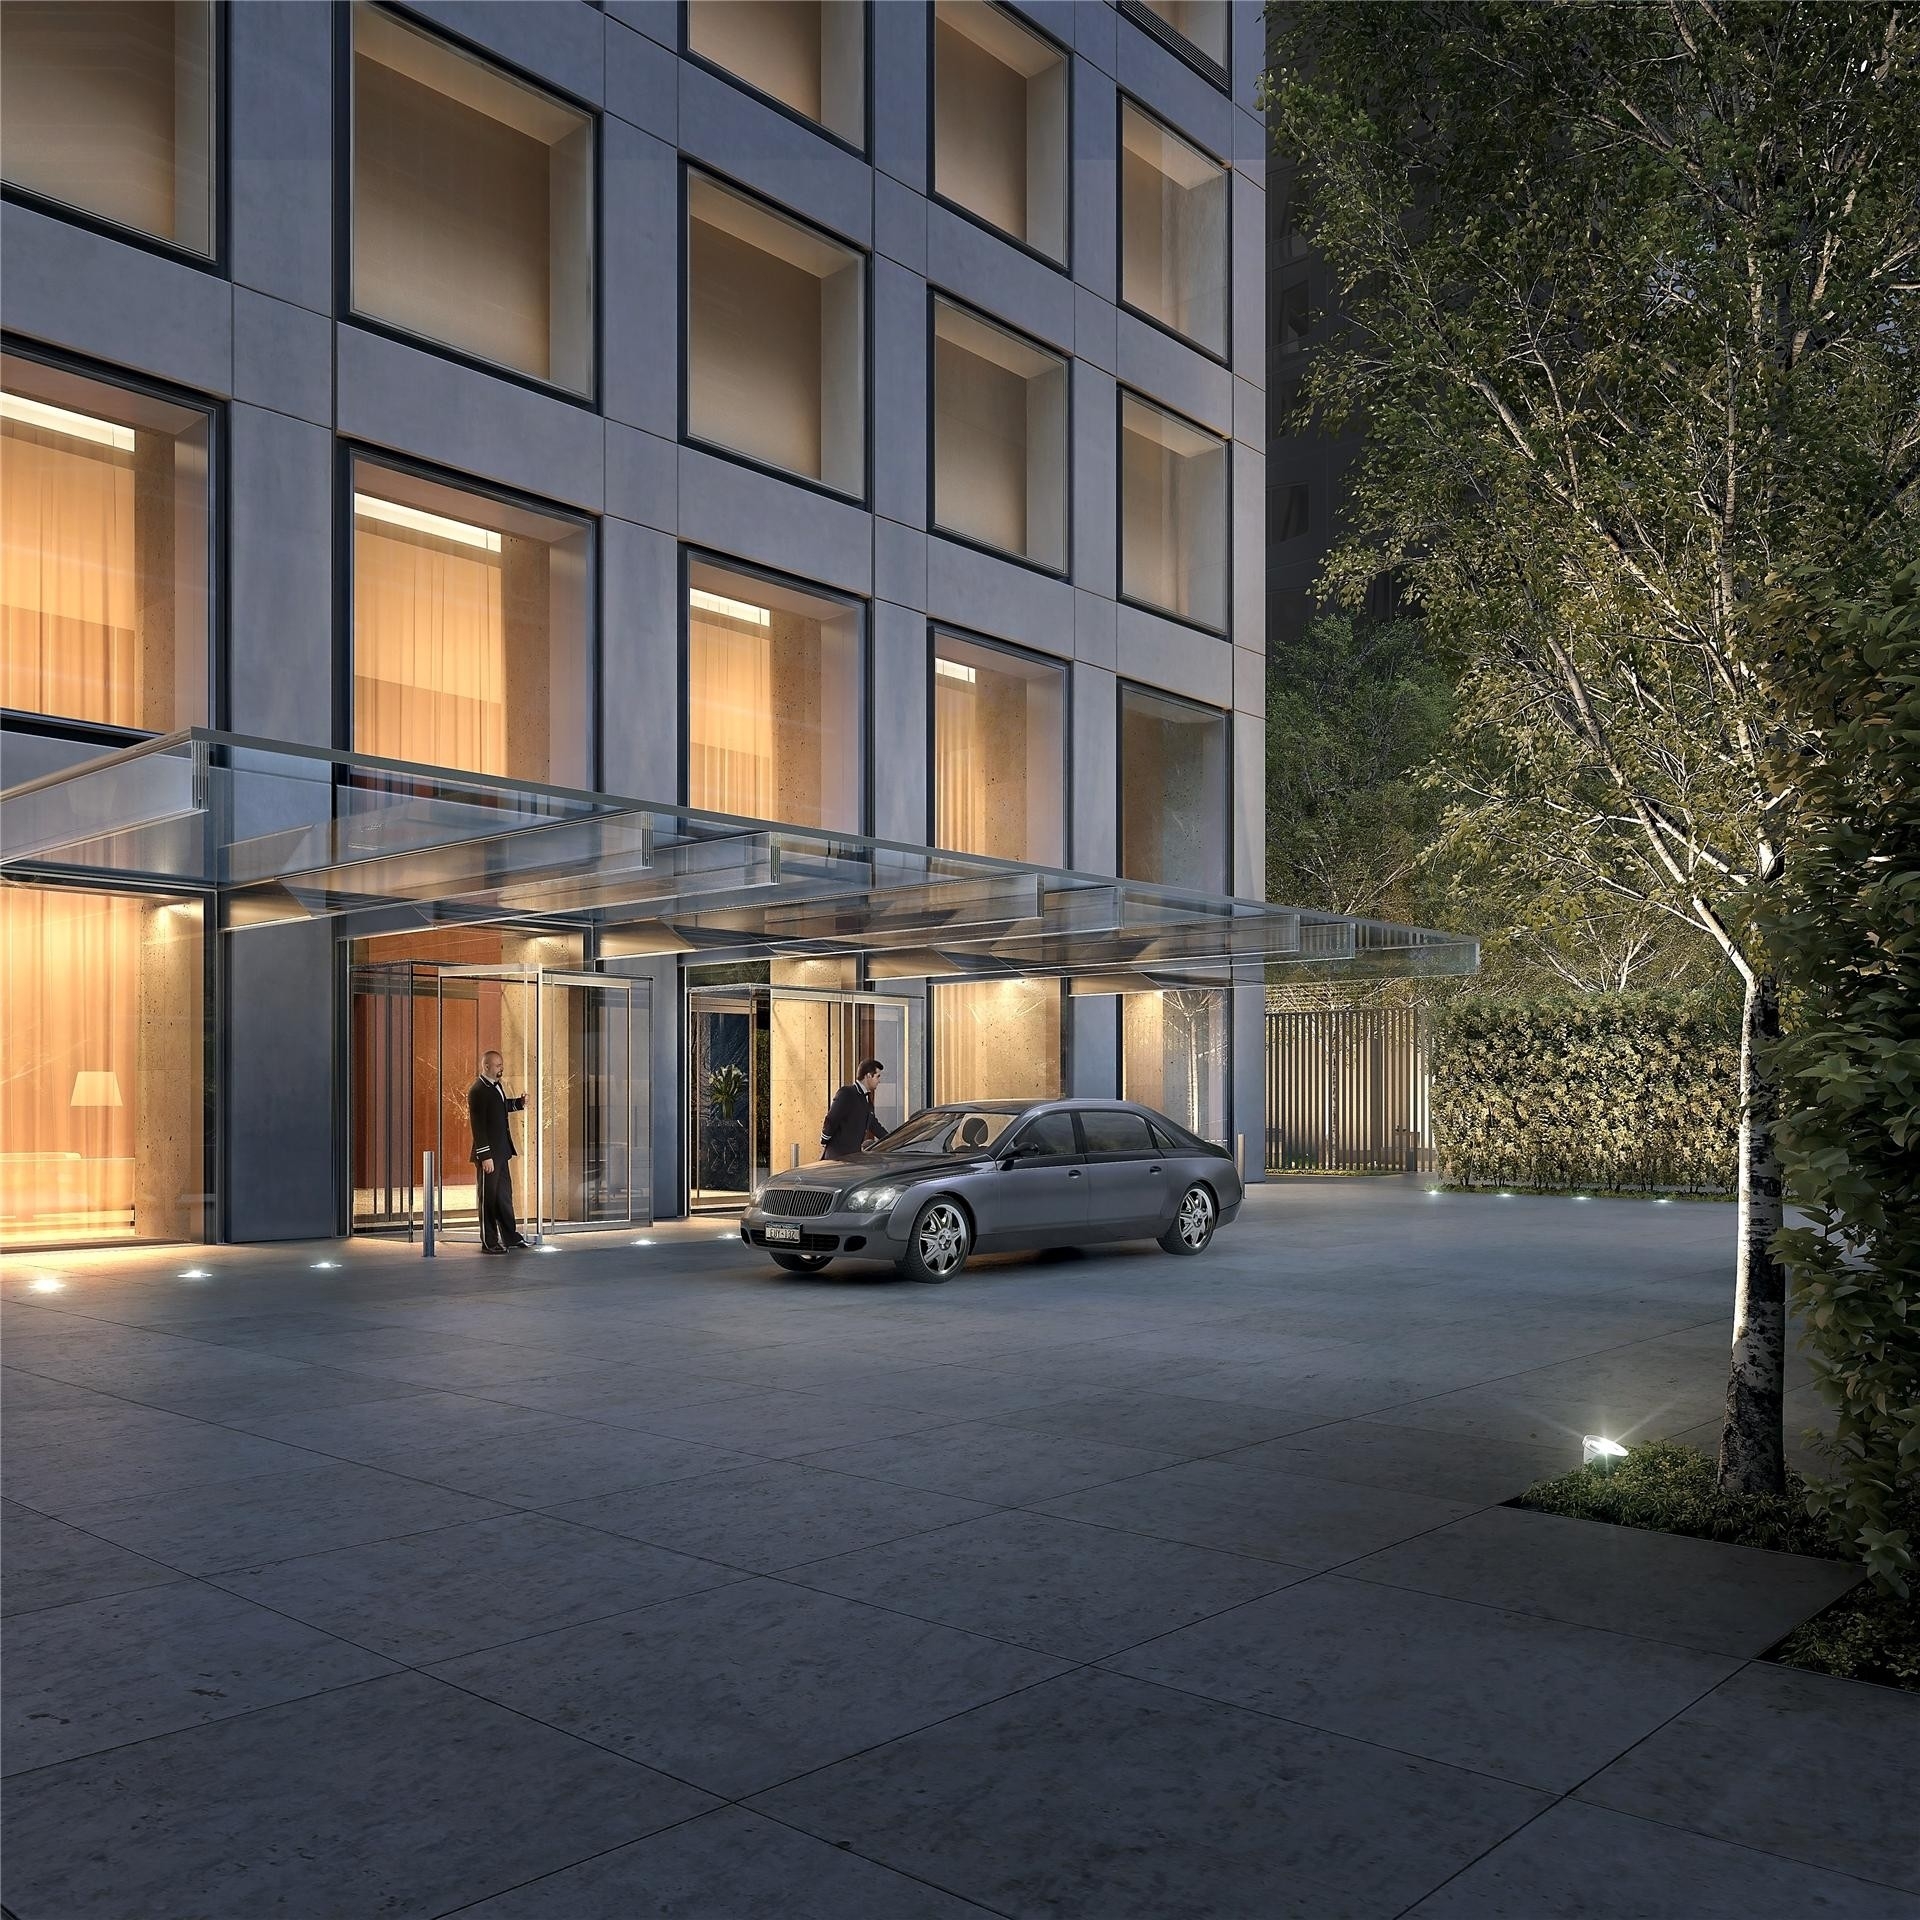 Property at 432 PARK AVE, 68A New York